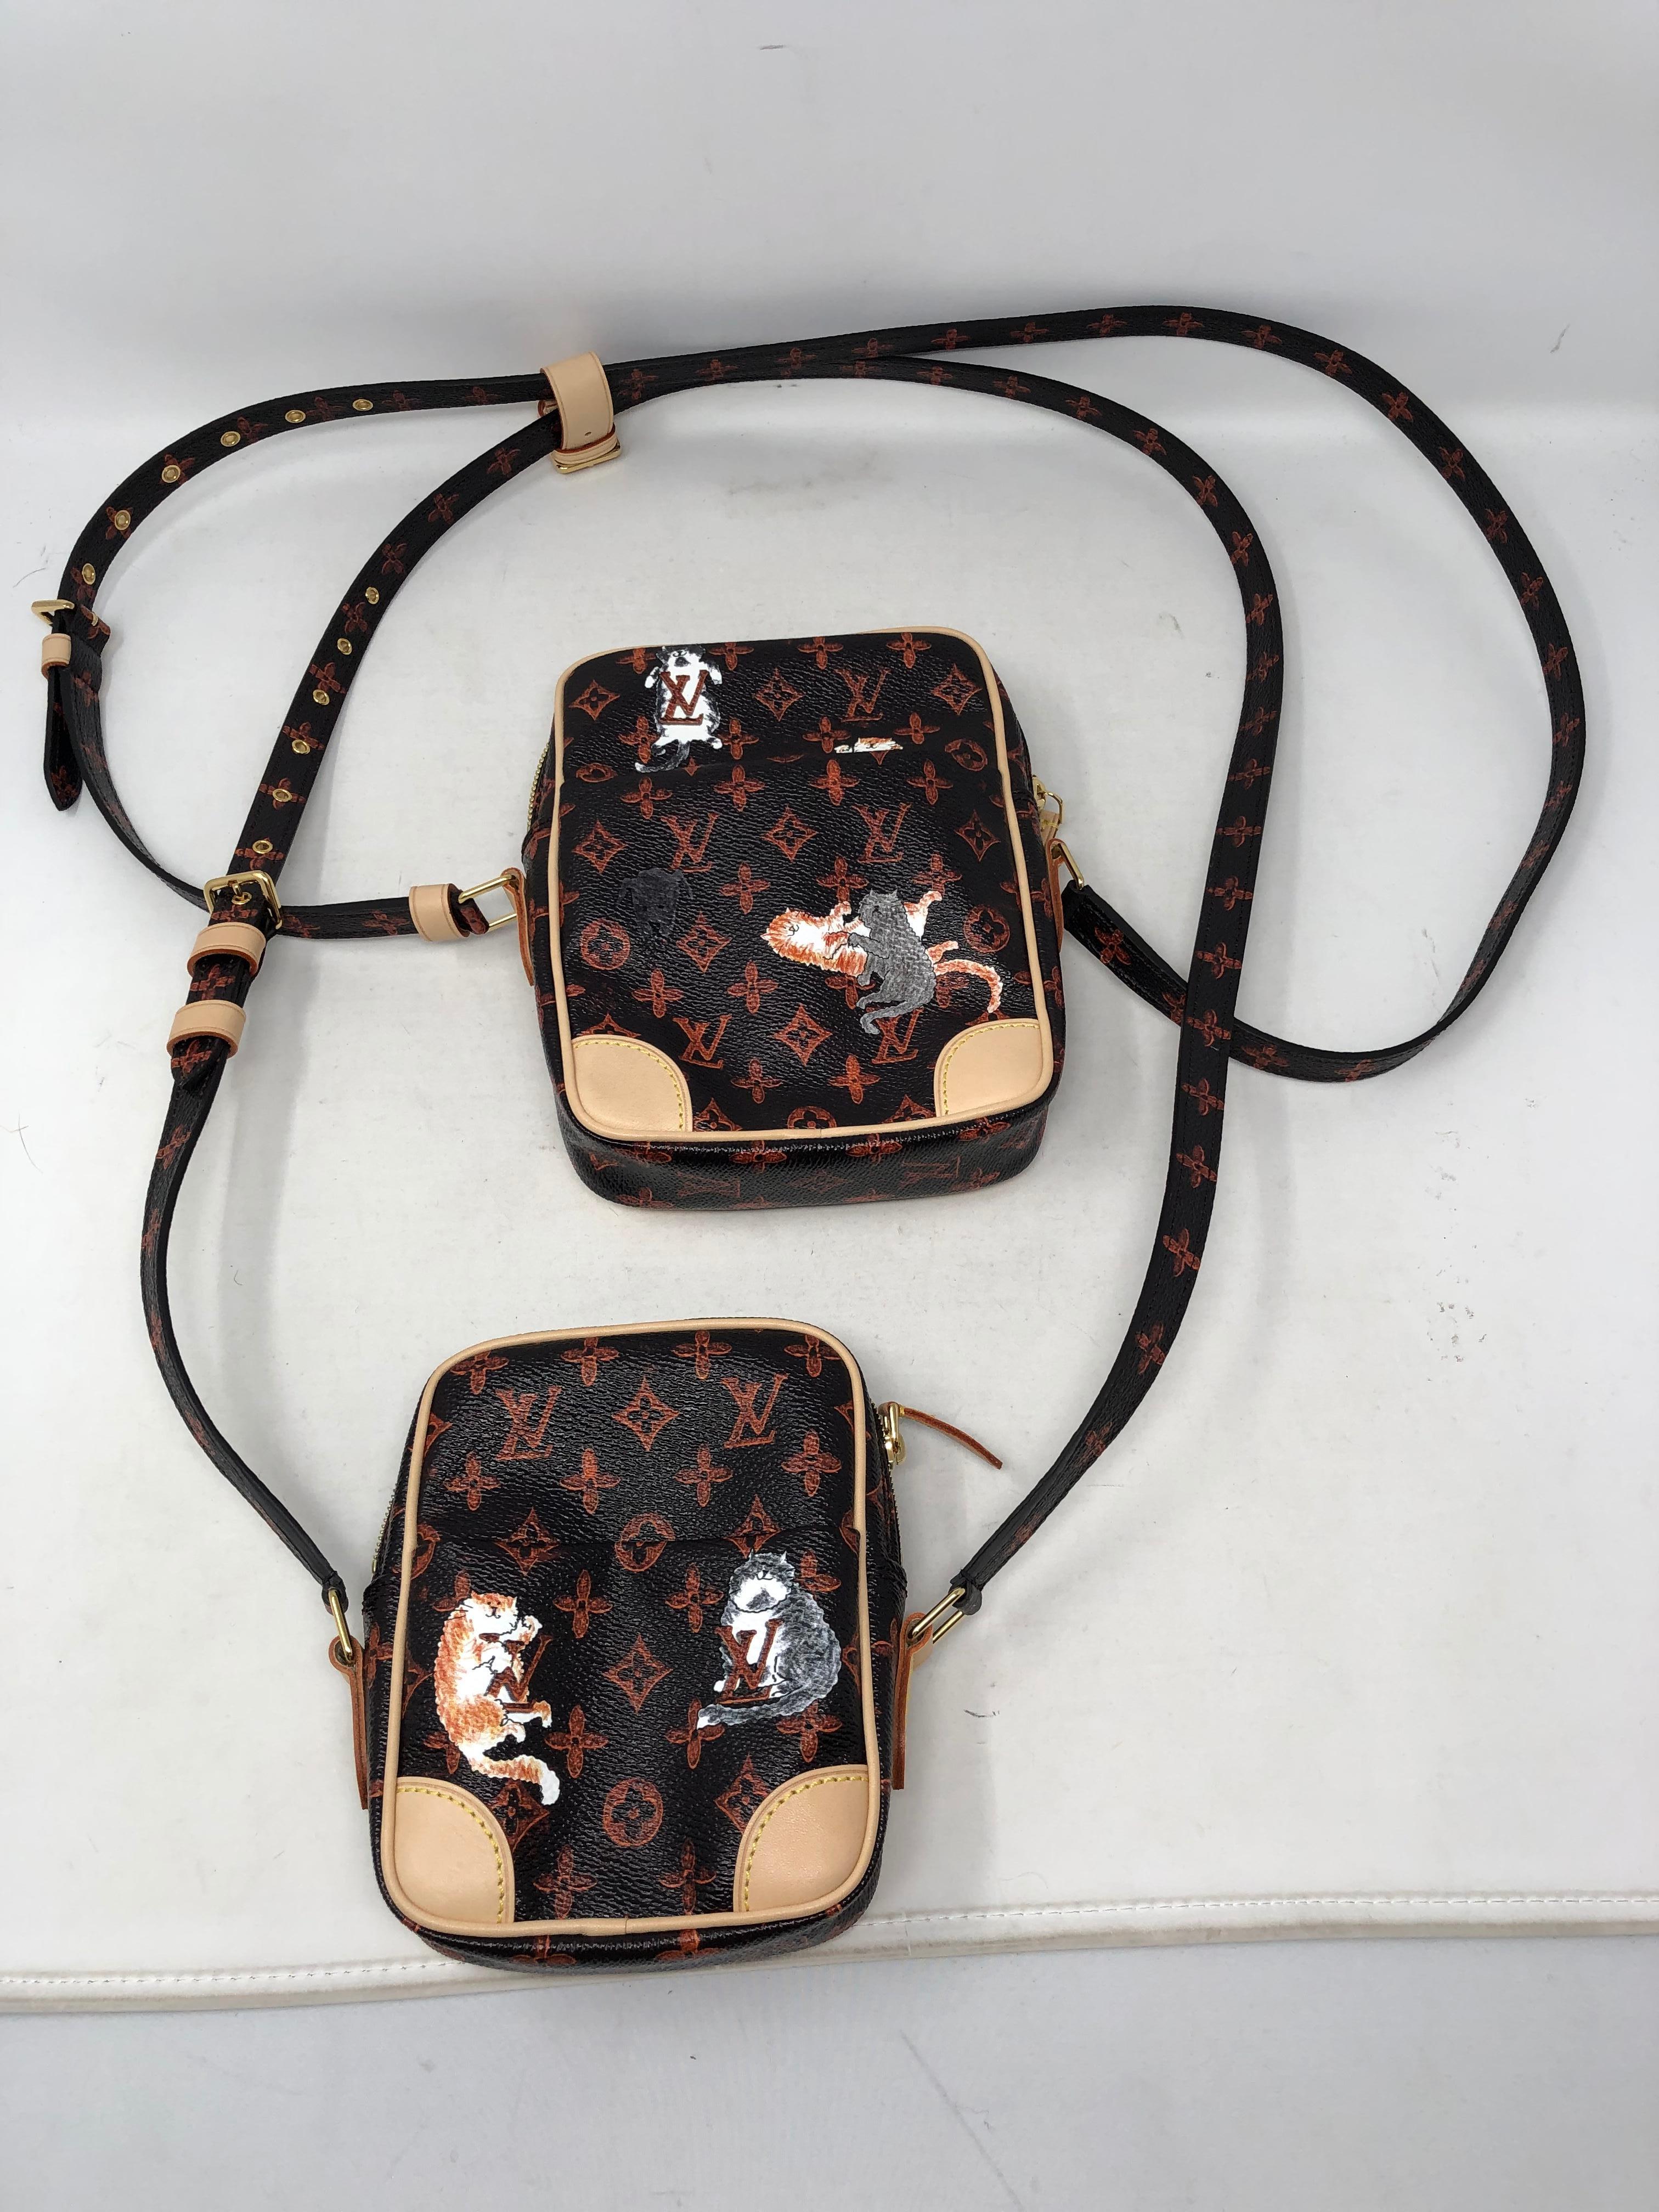 Louis Vuitton Transformed Monogram Catogram Paname Marron by Grace Coddington. The original 2 bags that came together as a set. Both bags and leather straps included. Brand new set. Never used. Rare collector's piece. Guaranteed authentic. 